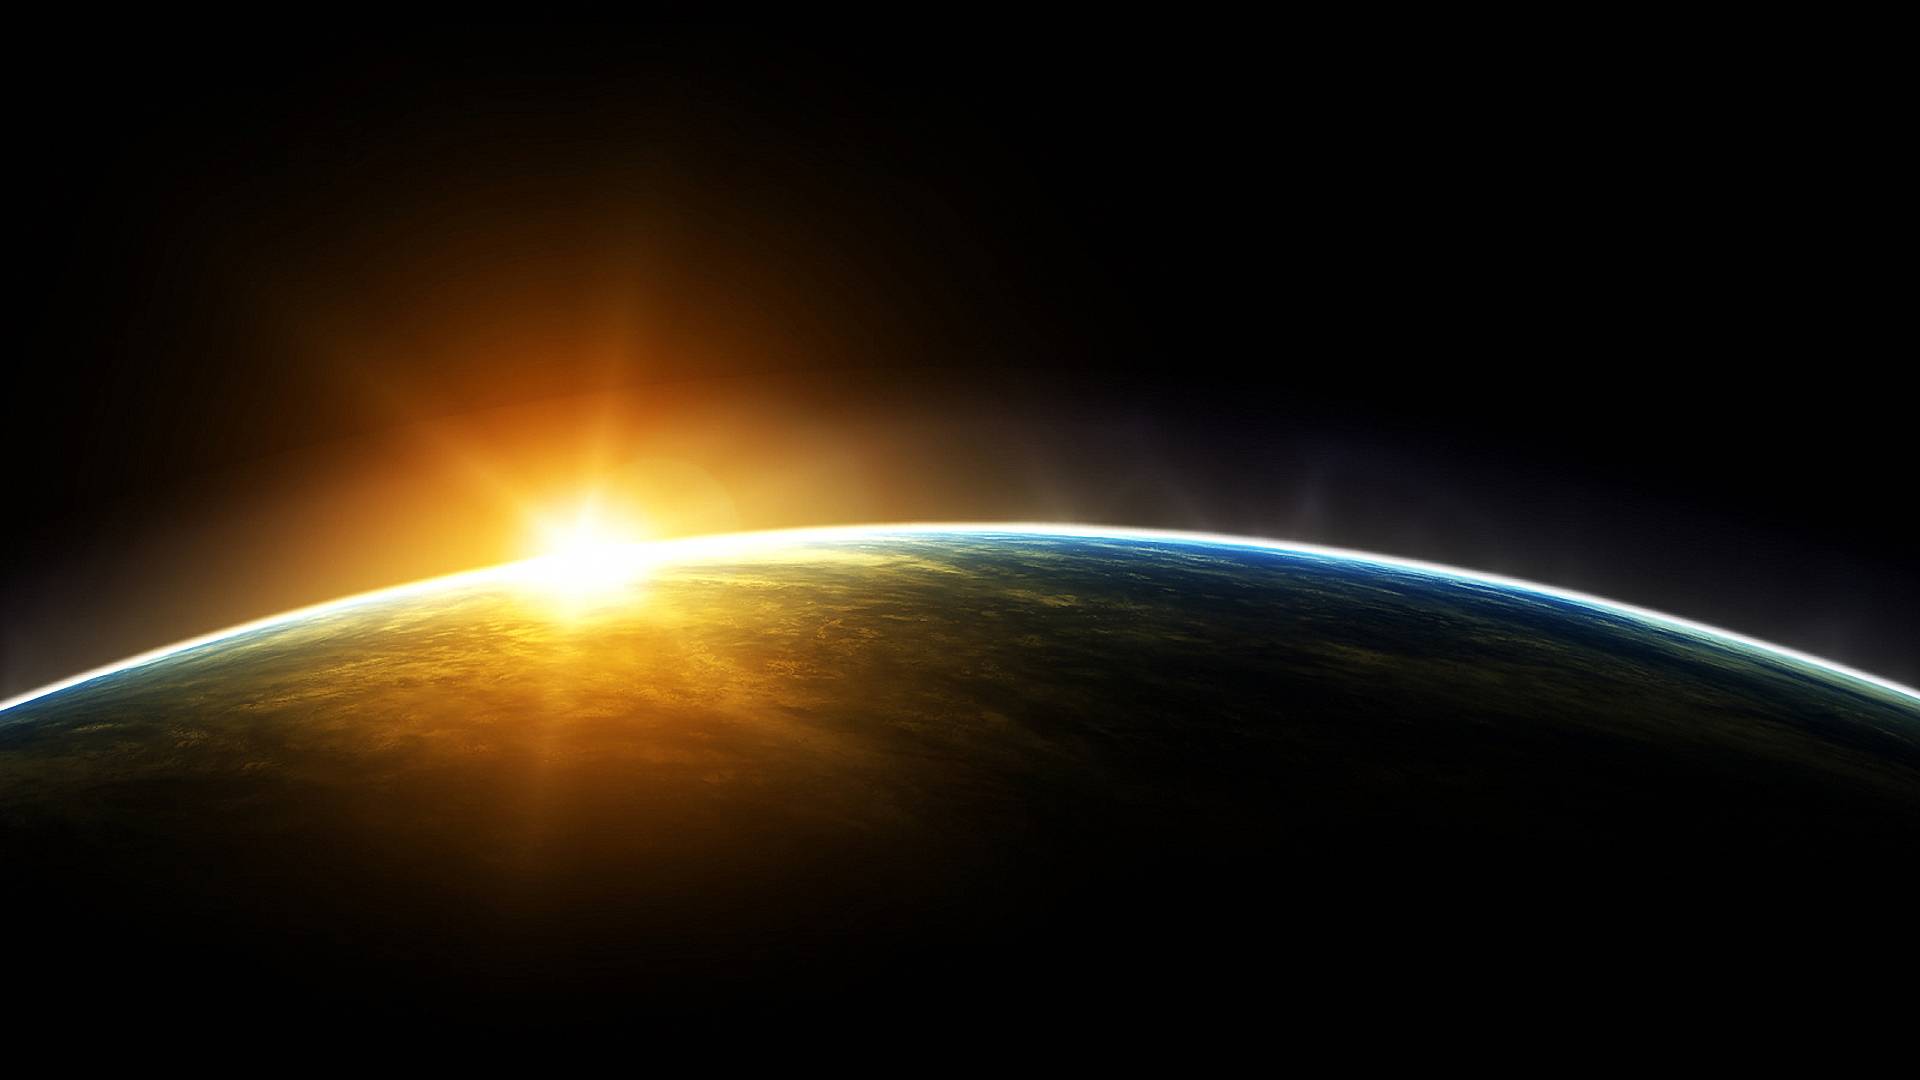  Earth Attachments Wallpapers For Desktop Backgrounds HD 1920x1080